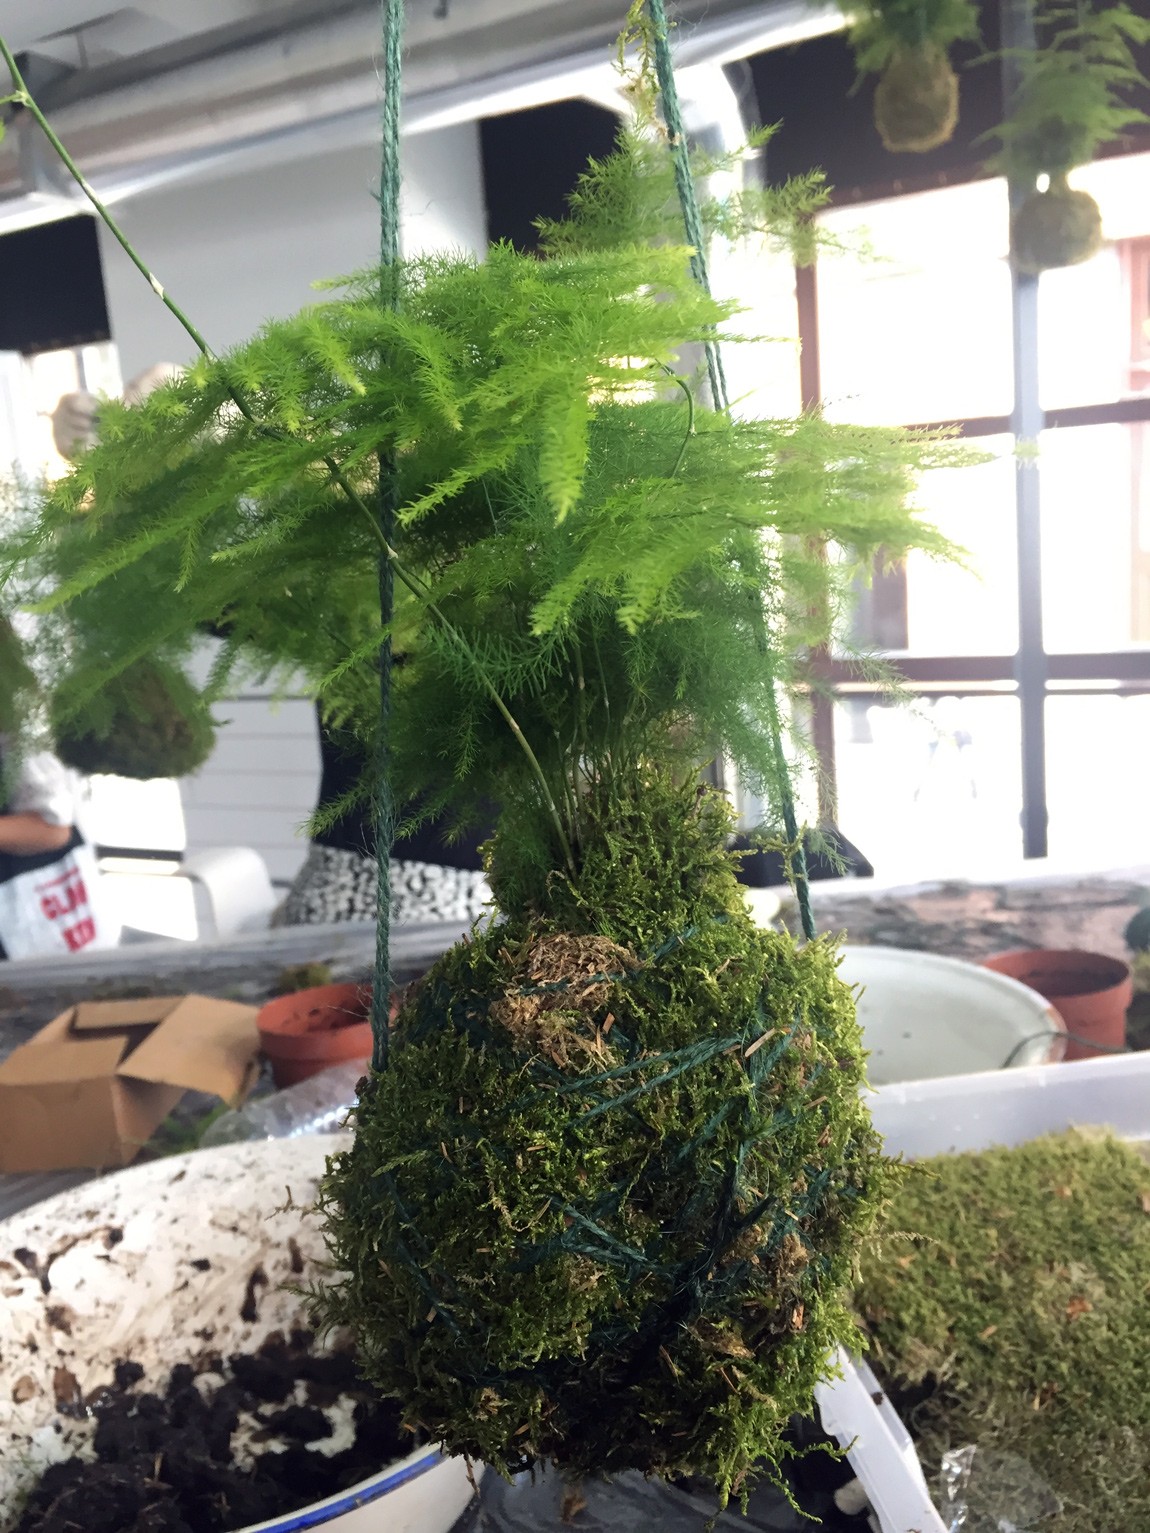 Once the moss in in place, twist twine around and create a hanging loop at the top. How to make Kokedama - find step by step instructions on Chalk & Moss (chalkandmoss.com).